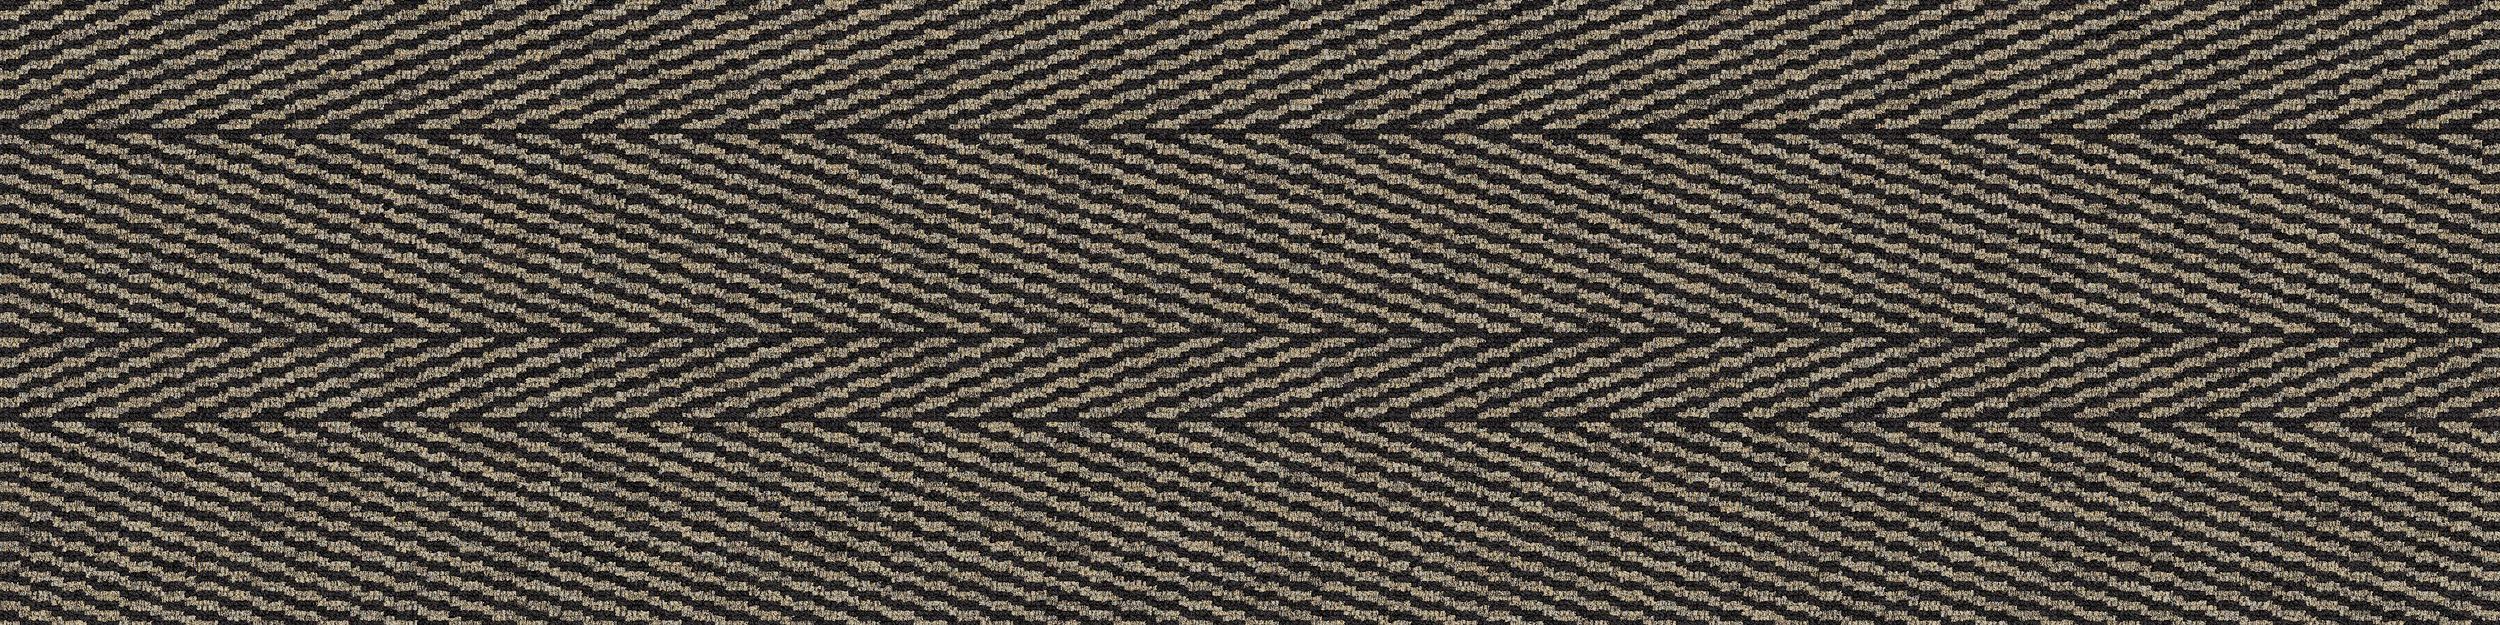 Stitch In Time Carpet Tile In Charcoal Stitch image number 2